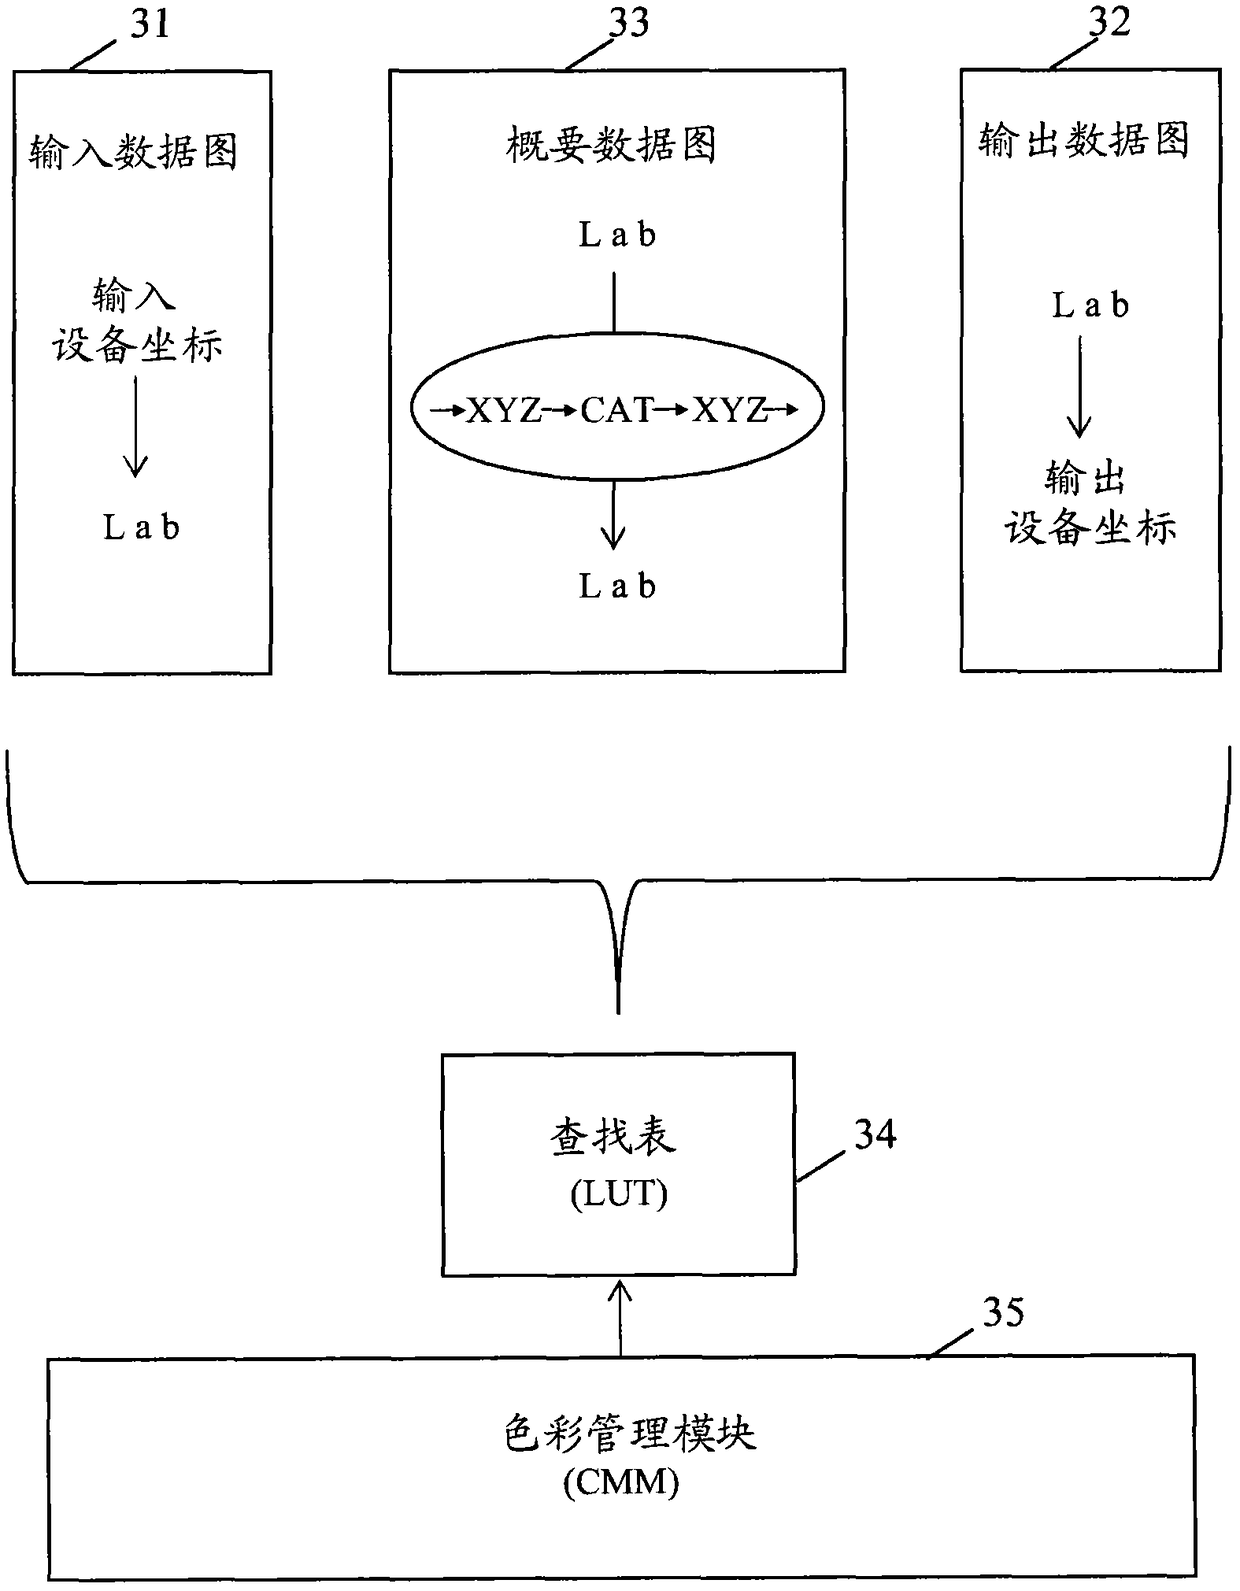 Method and apparatus for removing background color from an image